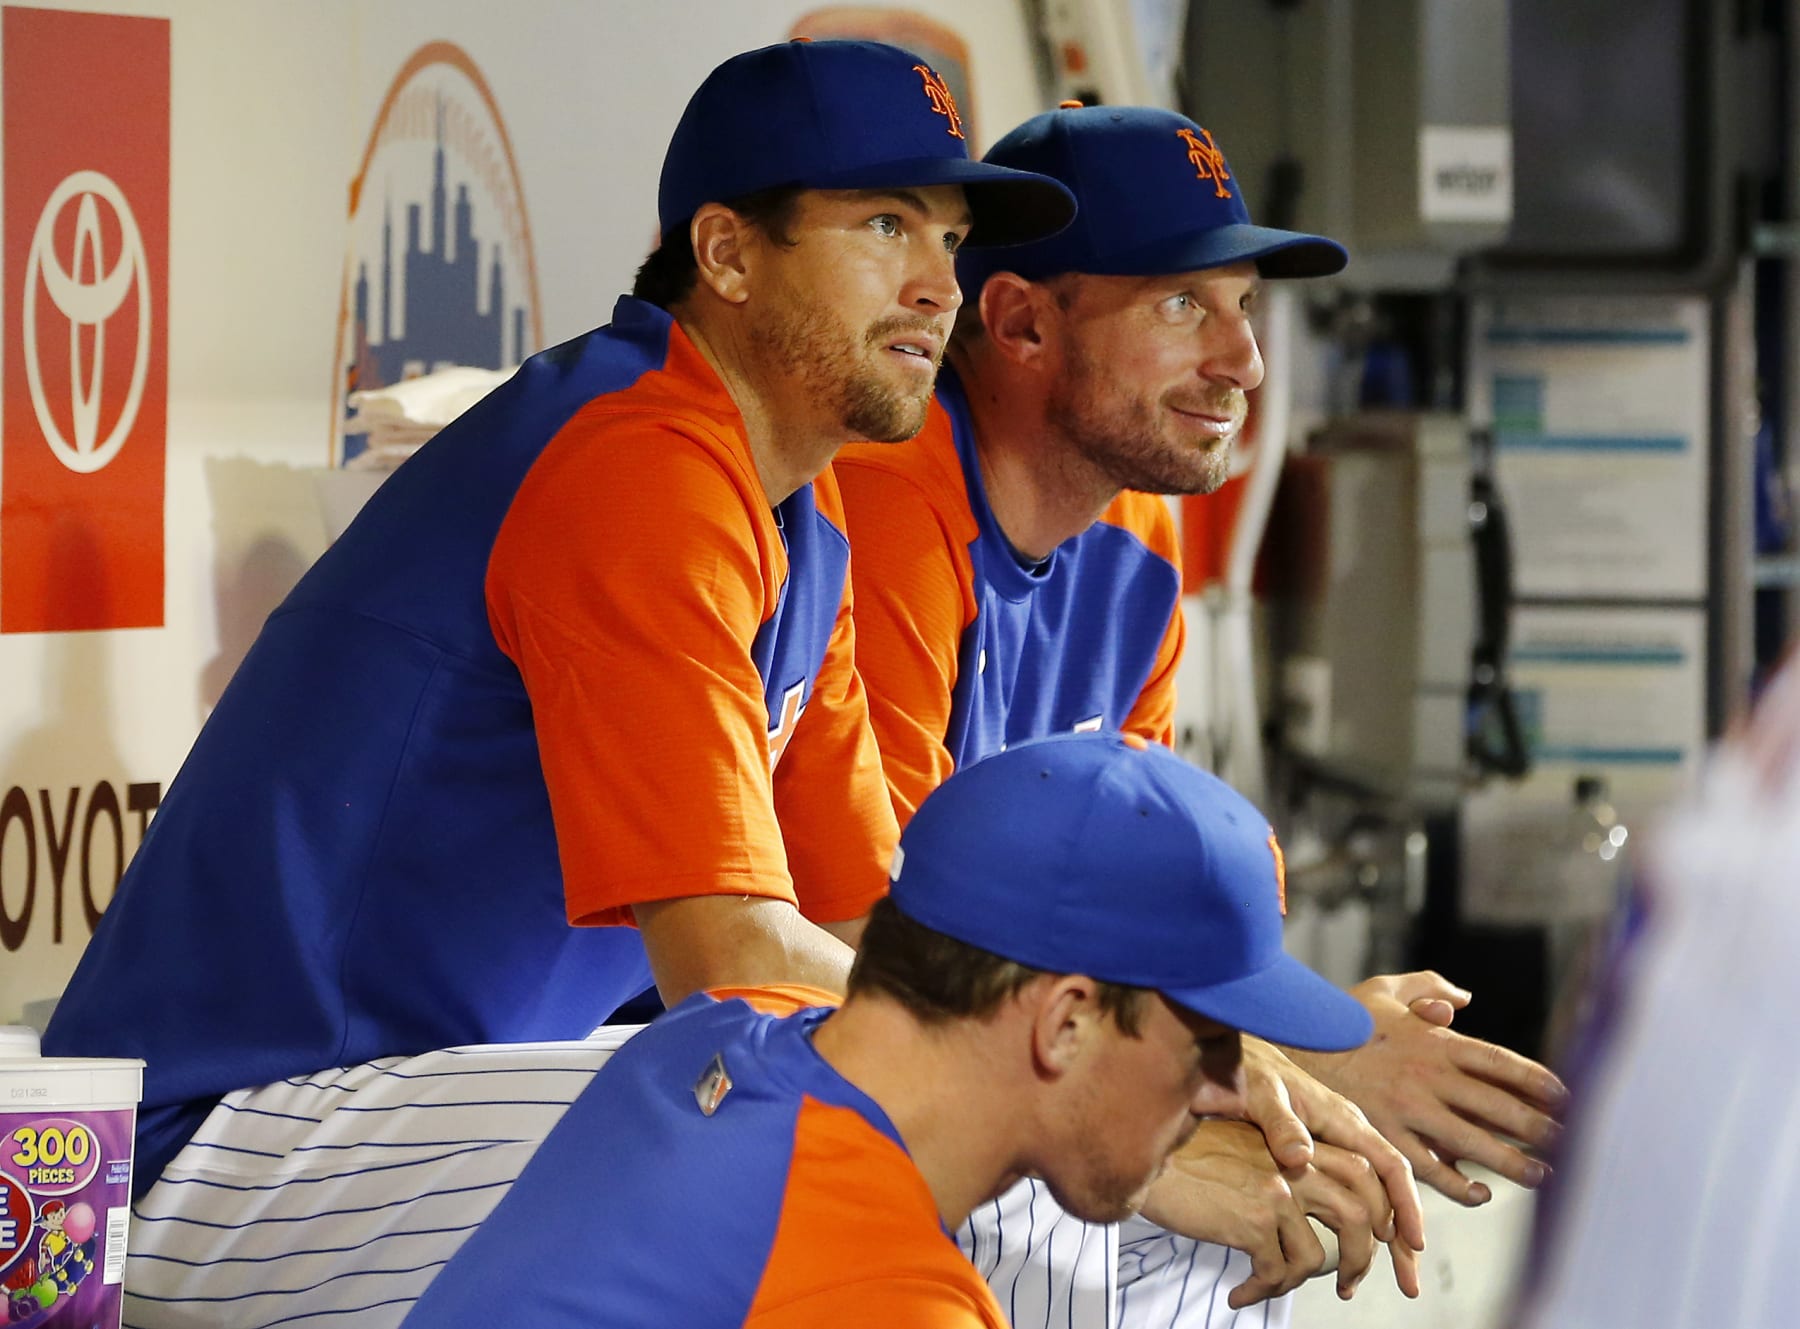 Mets' deGrom won't face Yankees, will start against Rockies